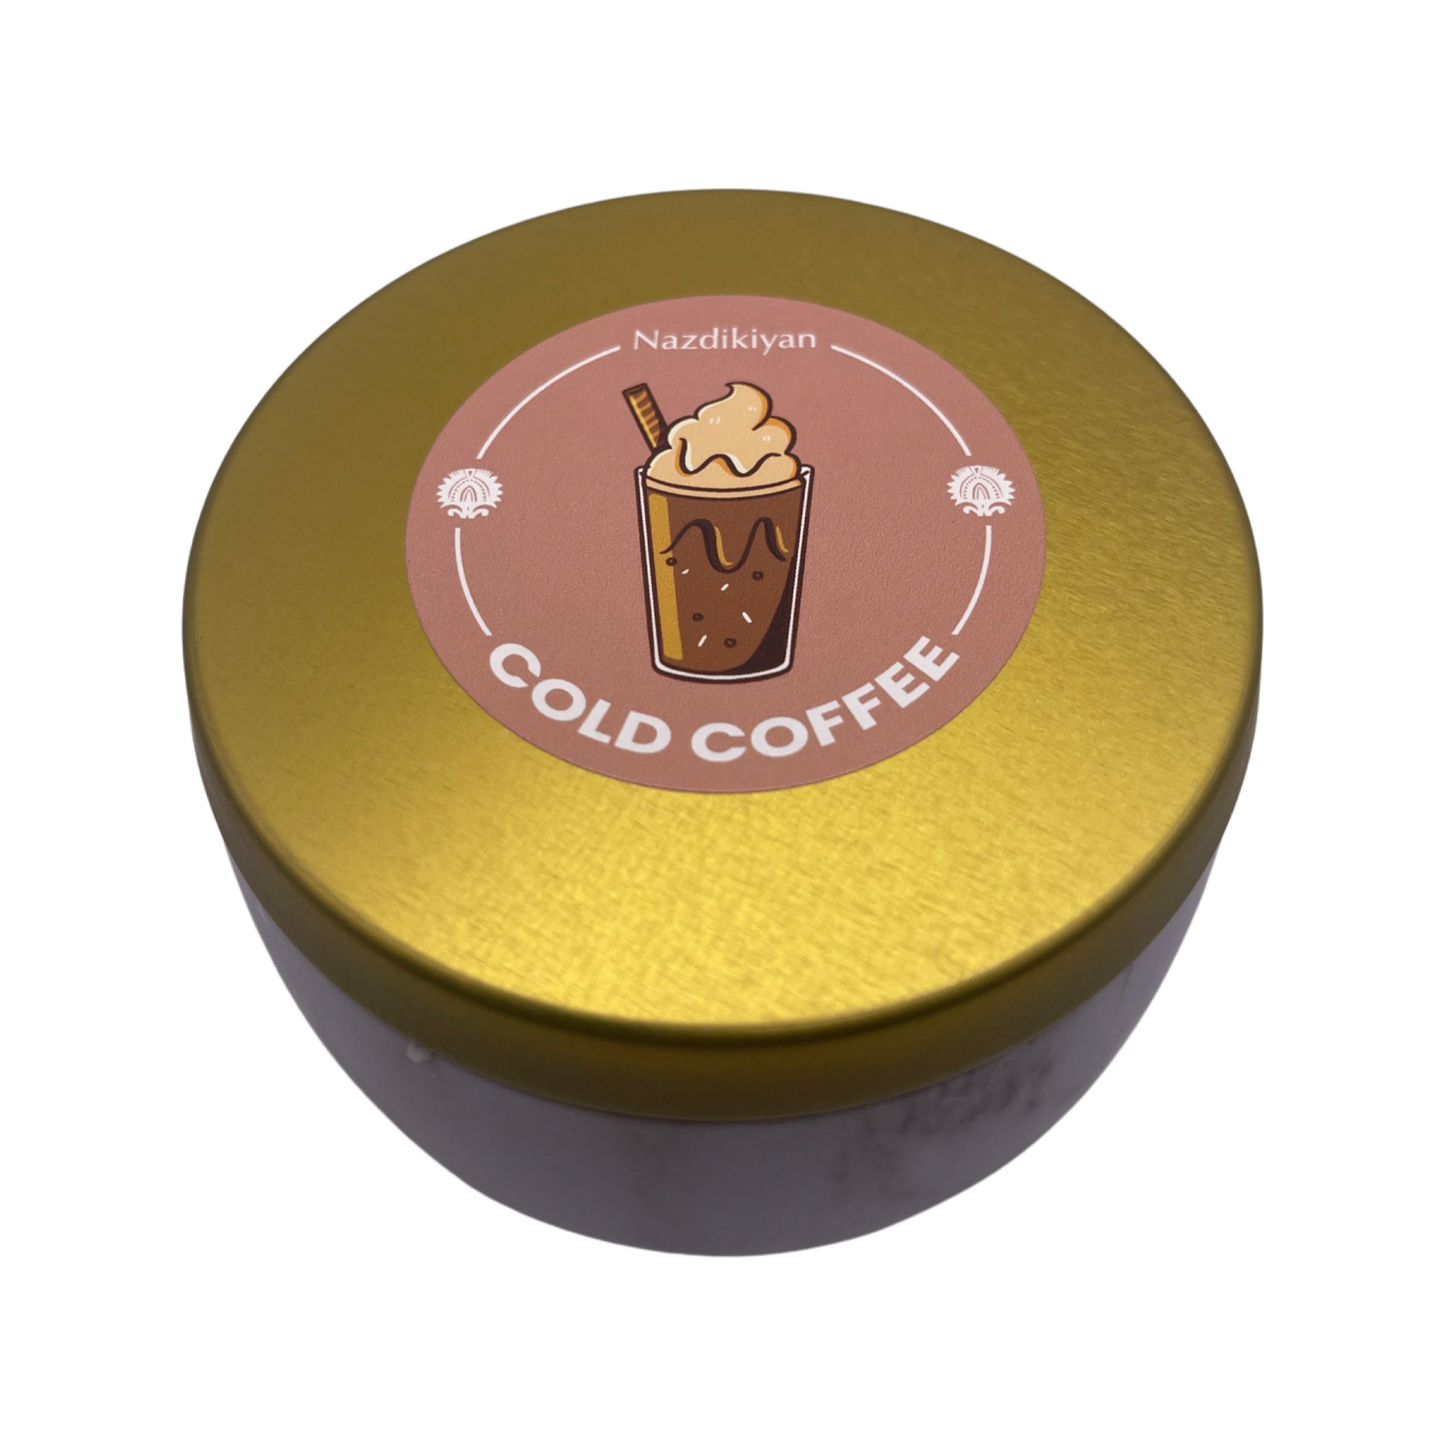 Cold Coffee Homemade Soy Candle